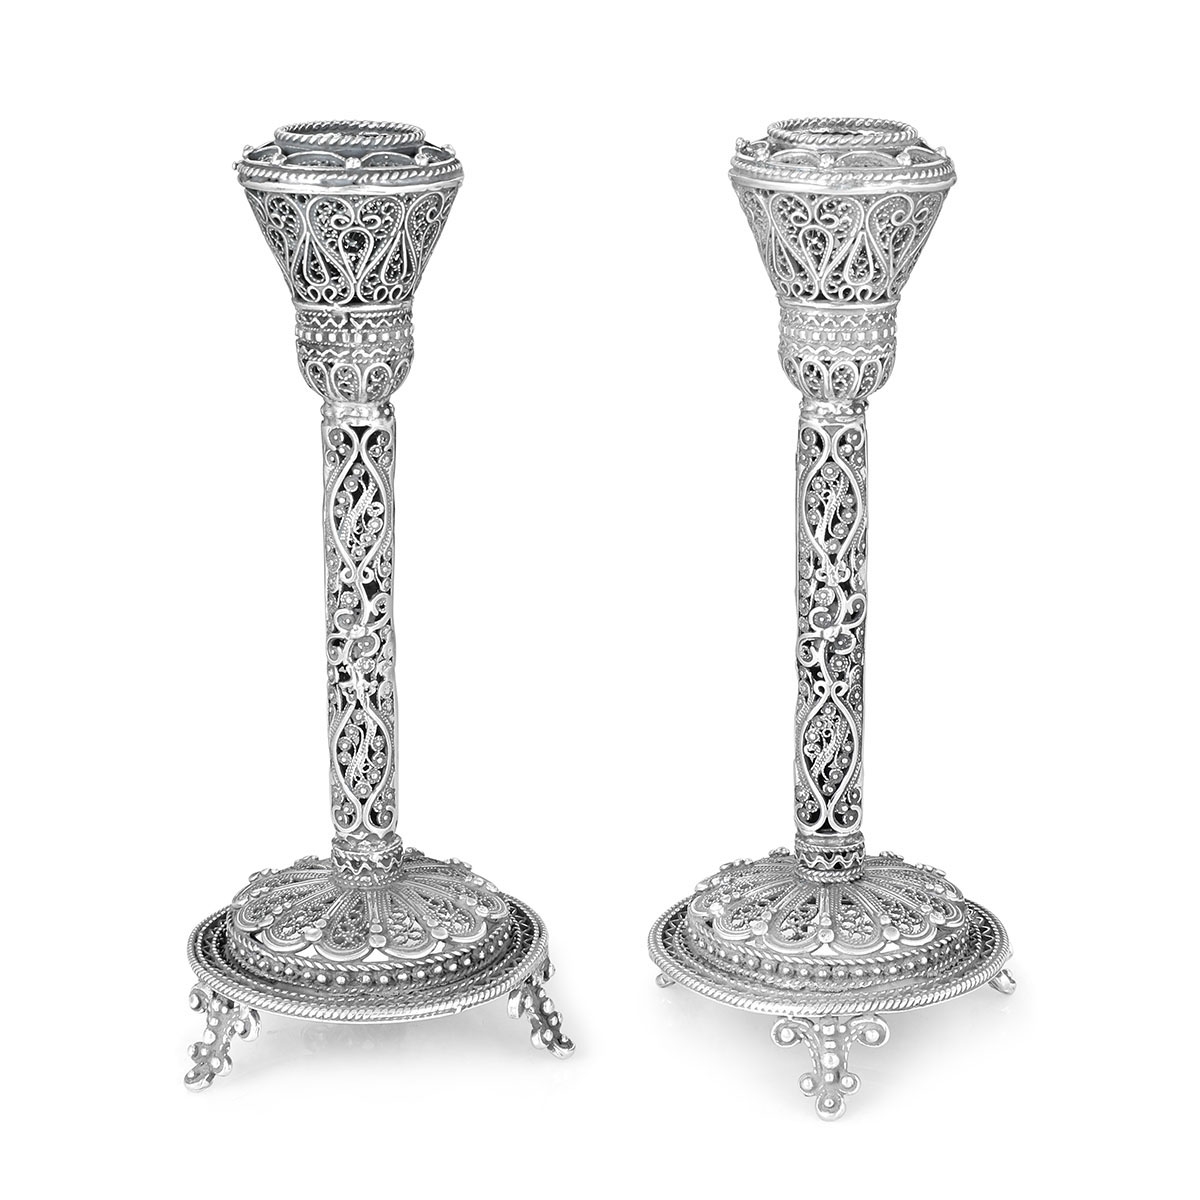 Traditional Yemenite Art Large Handcrafted Sterling Silver Shabbat Candlesticks With Filigree Design - 1